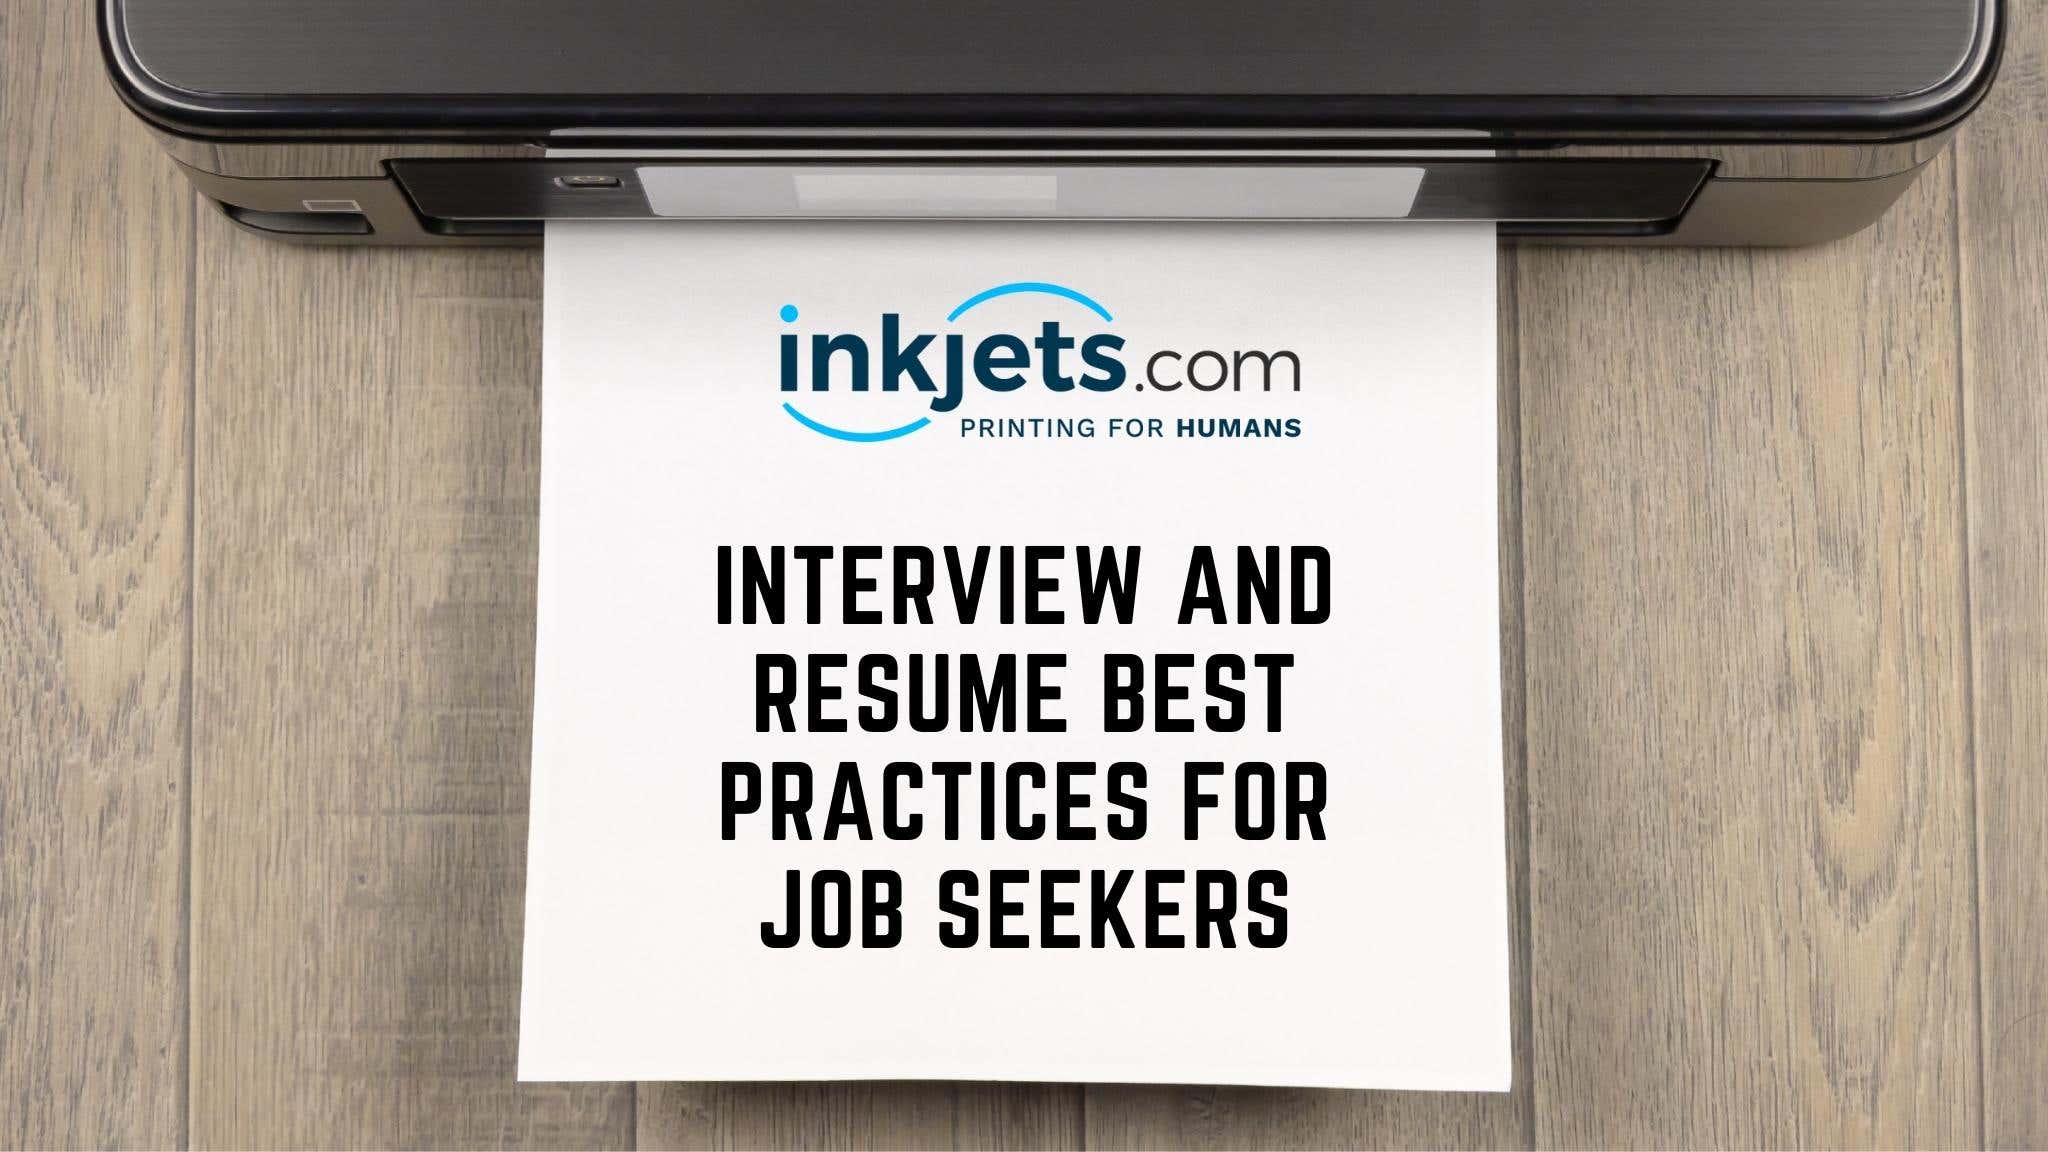 Interview and Resume Best Practices for Job Seekers Banner